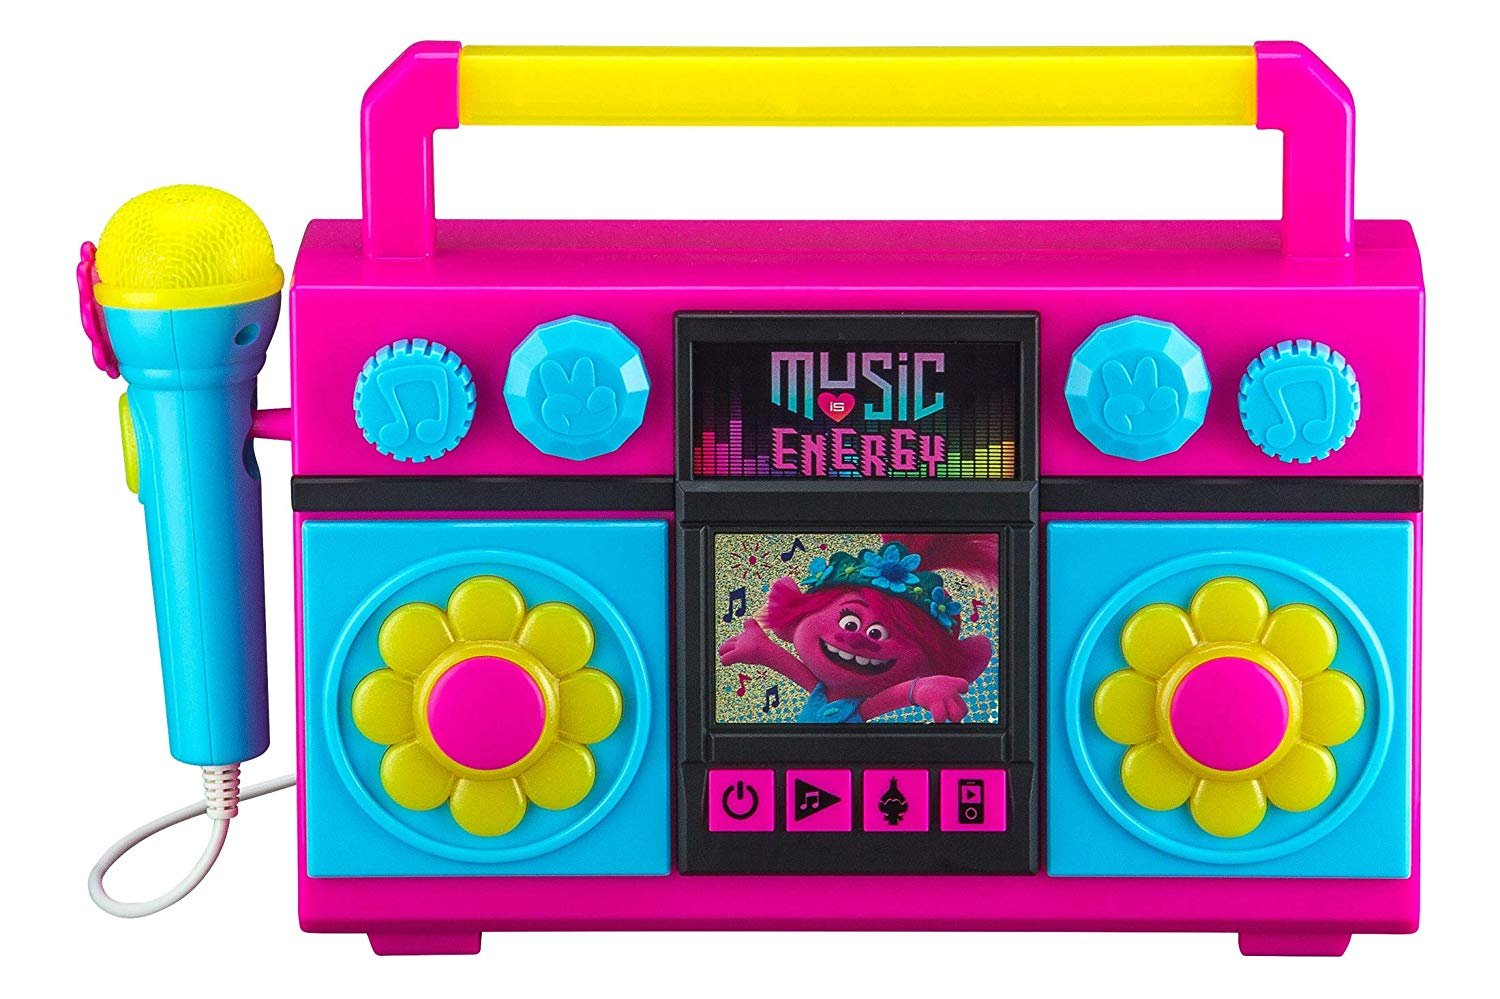 eKids Frozen 2 Sing Along Boombox with Microphone for sale online